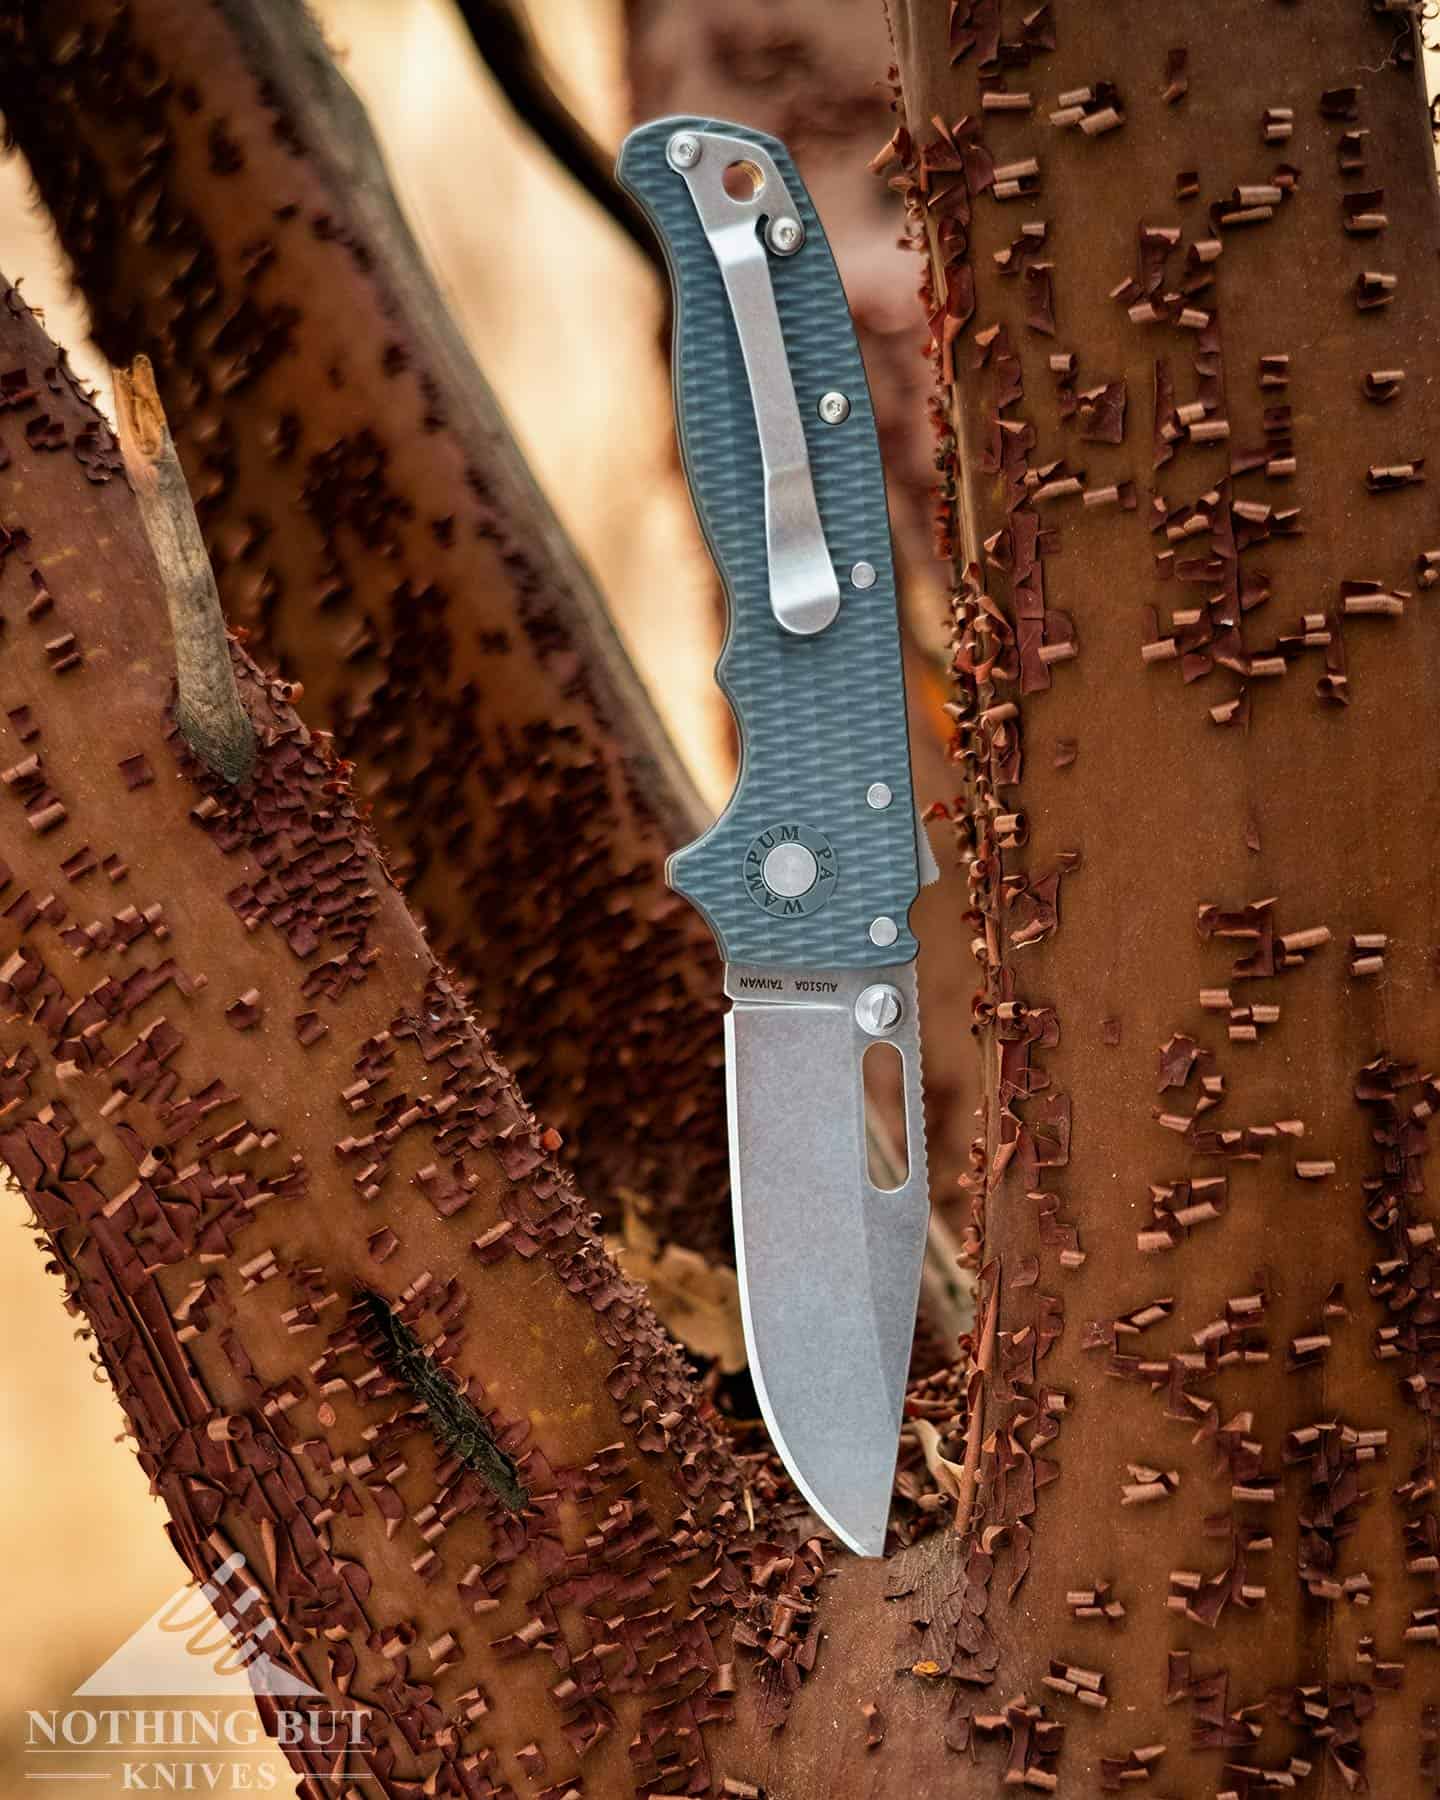 The Demko 20.5 with a grey FRN handle sticking out of a Manzanita tree.